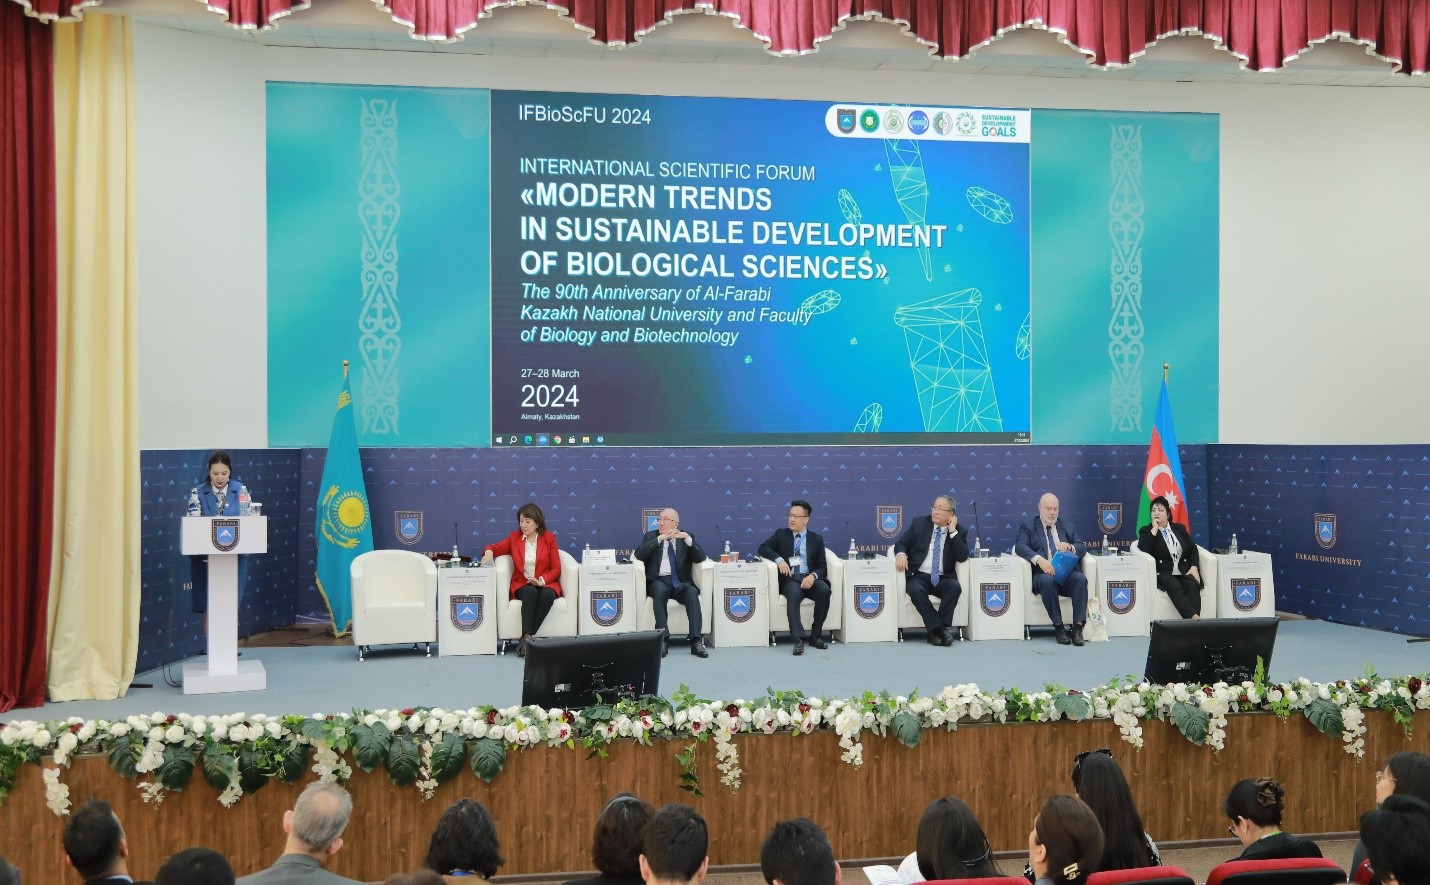 RESULTS OF THE INTERNATIONAL SCIENTIFIC FORUM "MODERN TRENDS OF SUSTAINABLE DEVELOPMENT OF BIOLOGICAL SCIENCES" DEDICATED TO THE 90TH ANNIVERSARY OF AL-FARABI KAZAKH NATIONAL UNIVERSITY AND THE FACULTY OF BIOLOGY AND BIOTECHNOLOGY